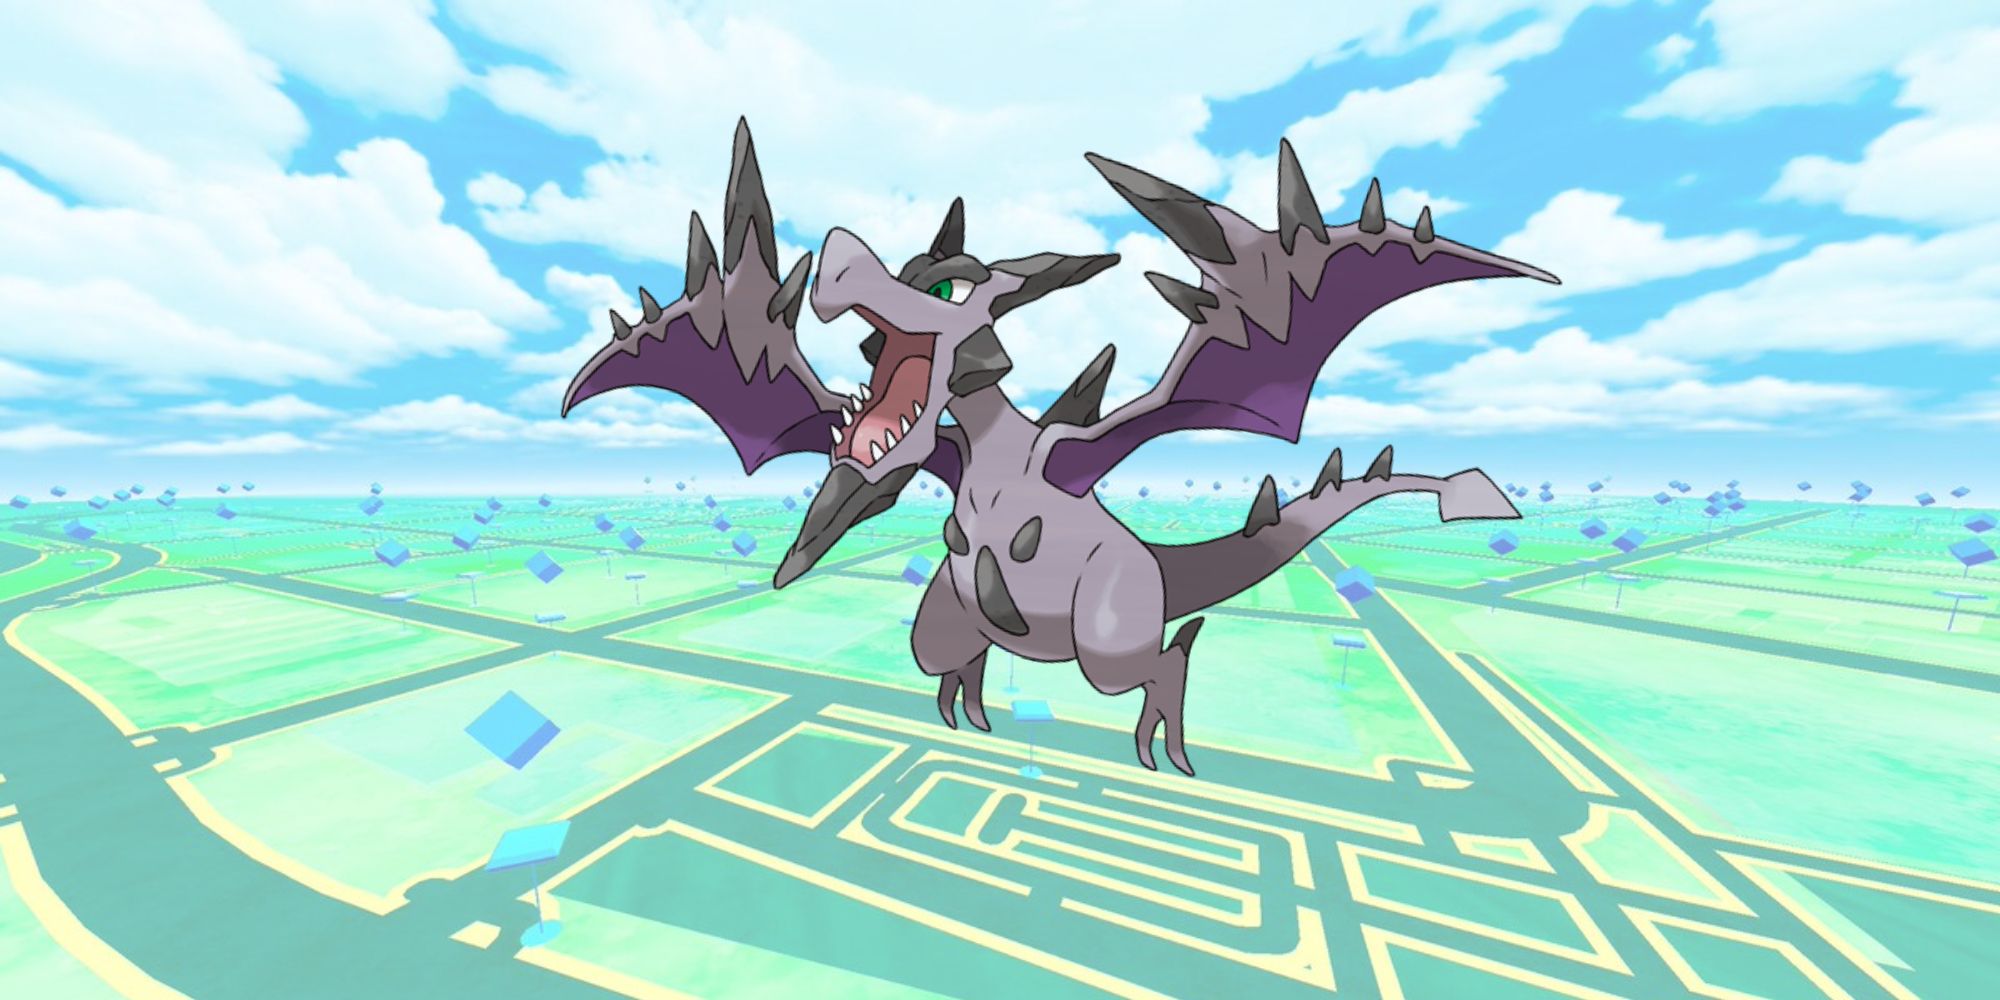 Mega Aerodactyl from Pokemon Go, with the map overlay in the background